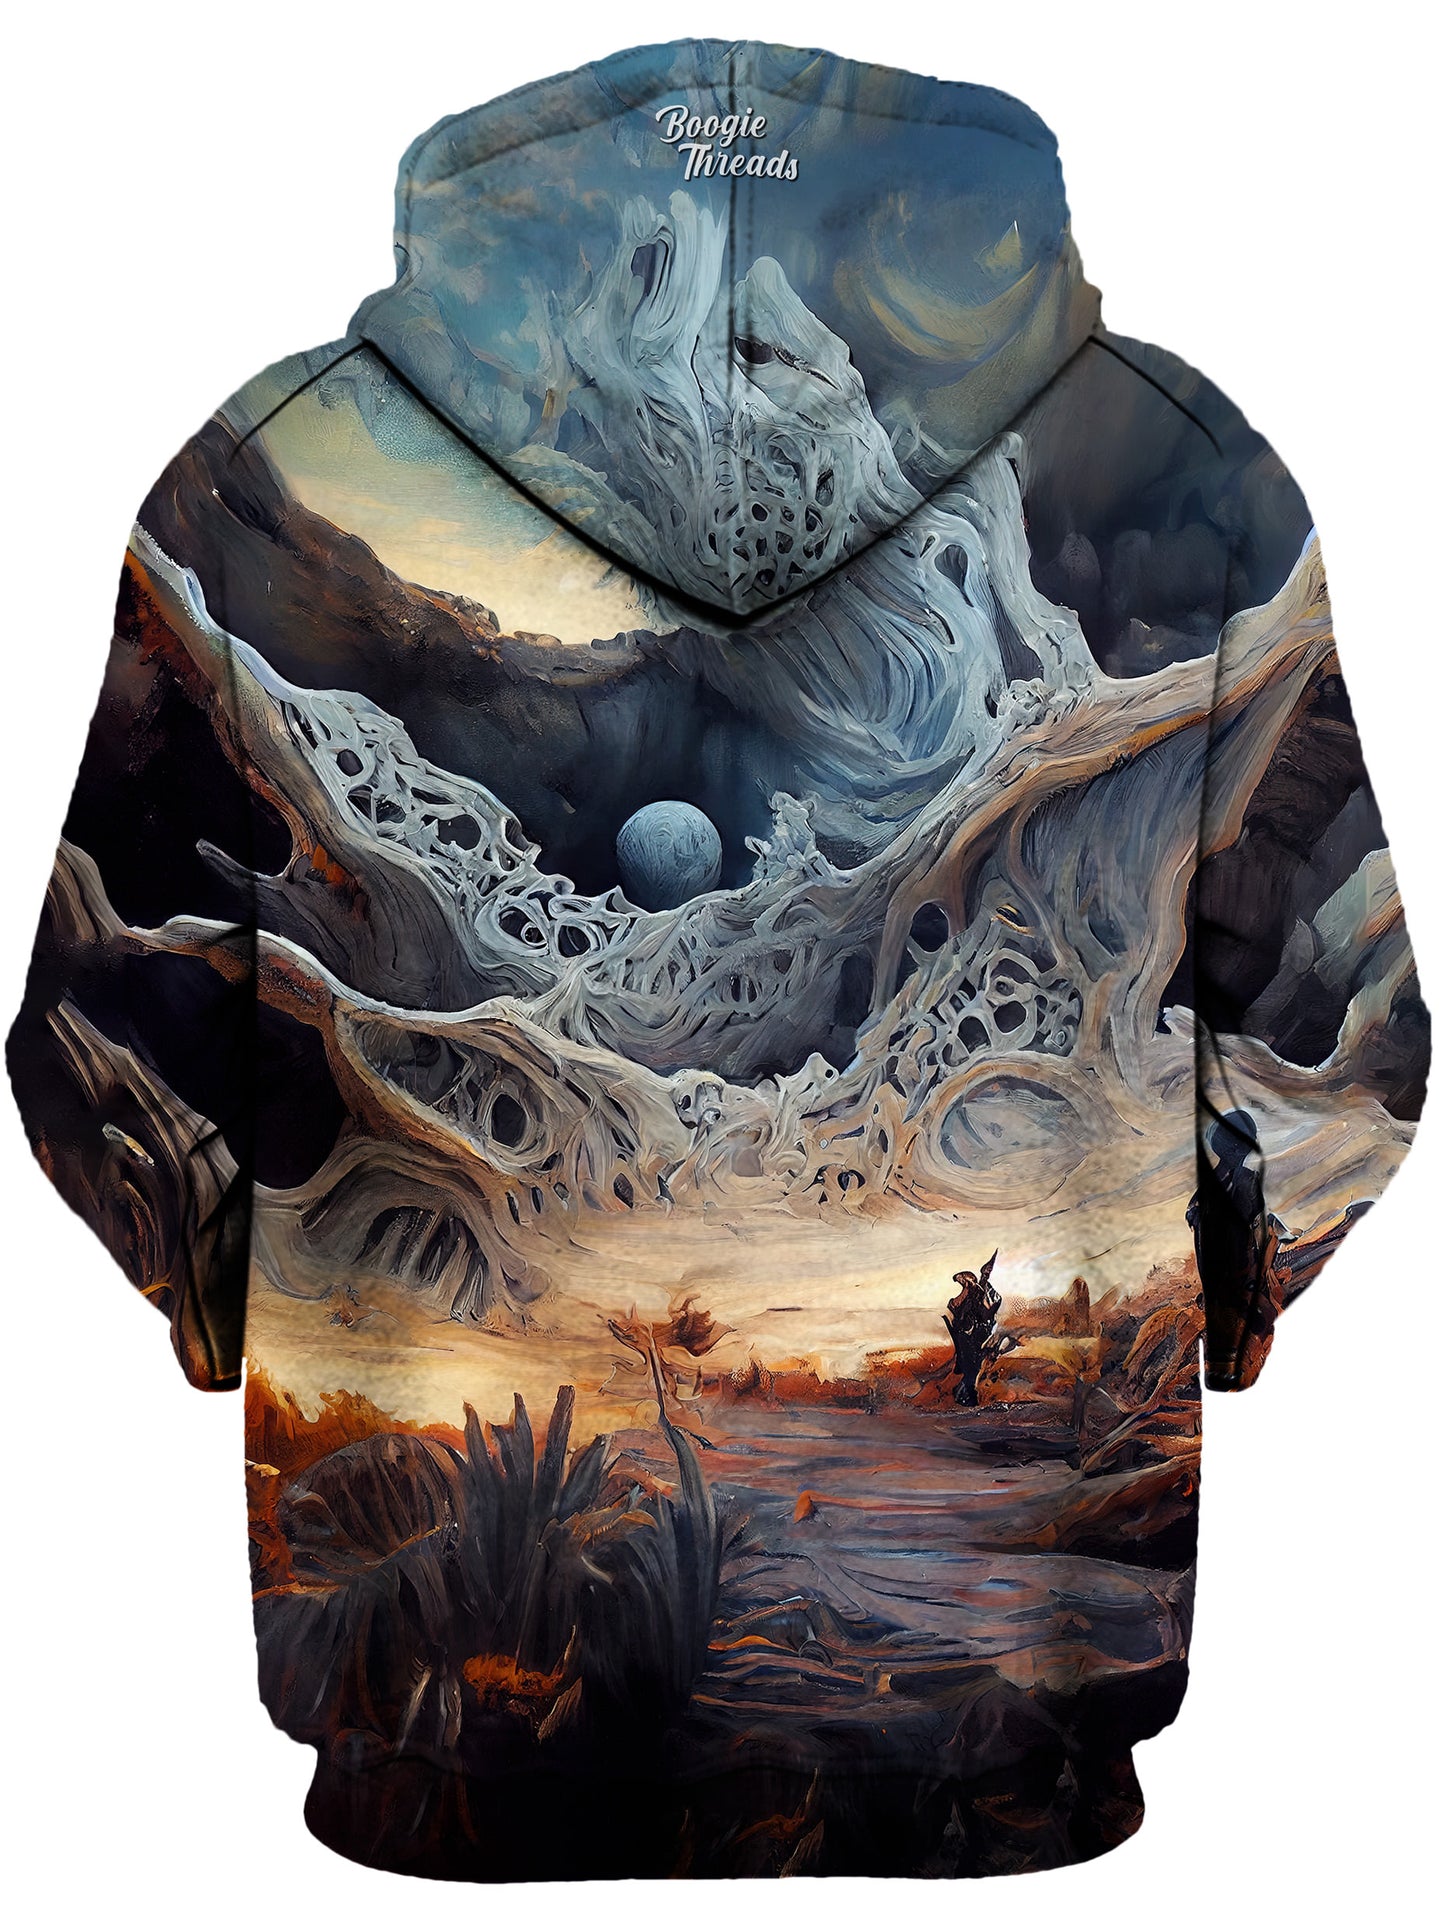 Enlightened Expression Unisex Zip-Up Hoodie, Gratefully Dyed, | iEDM